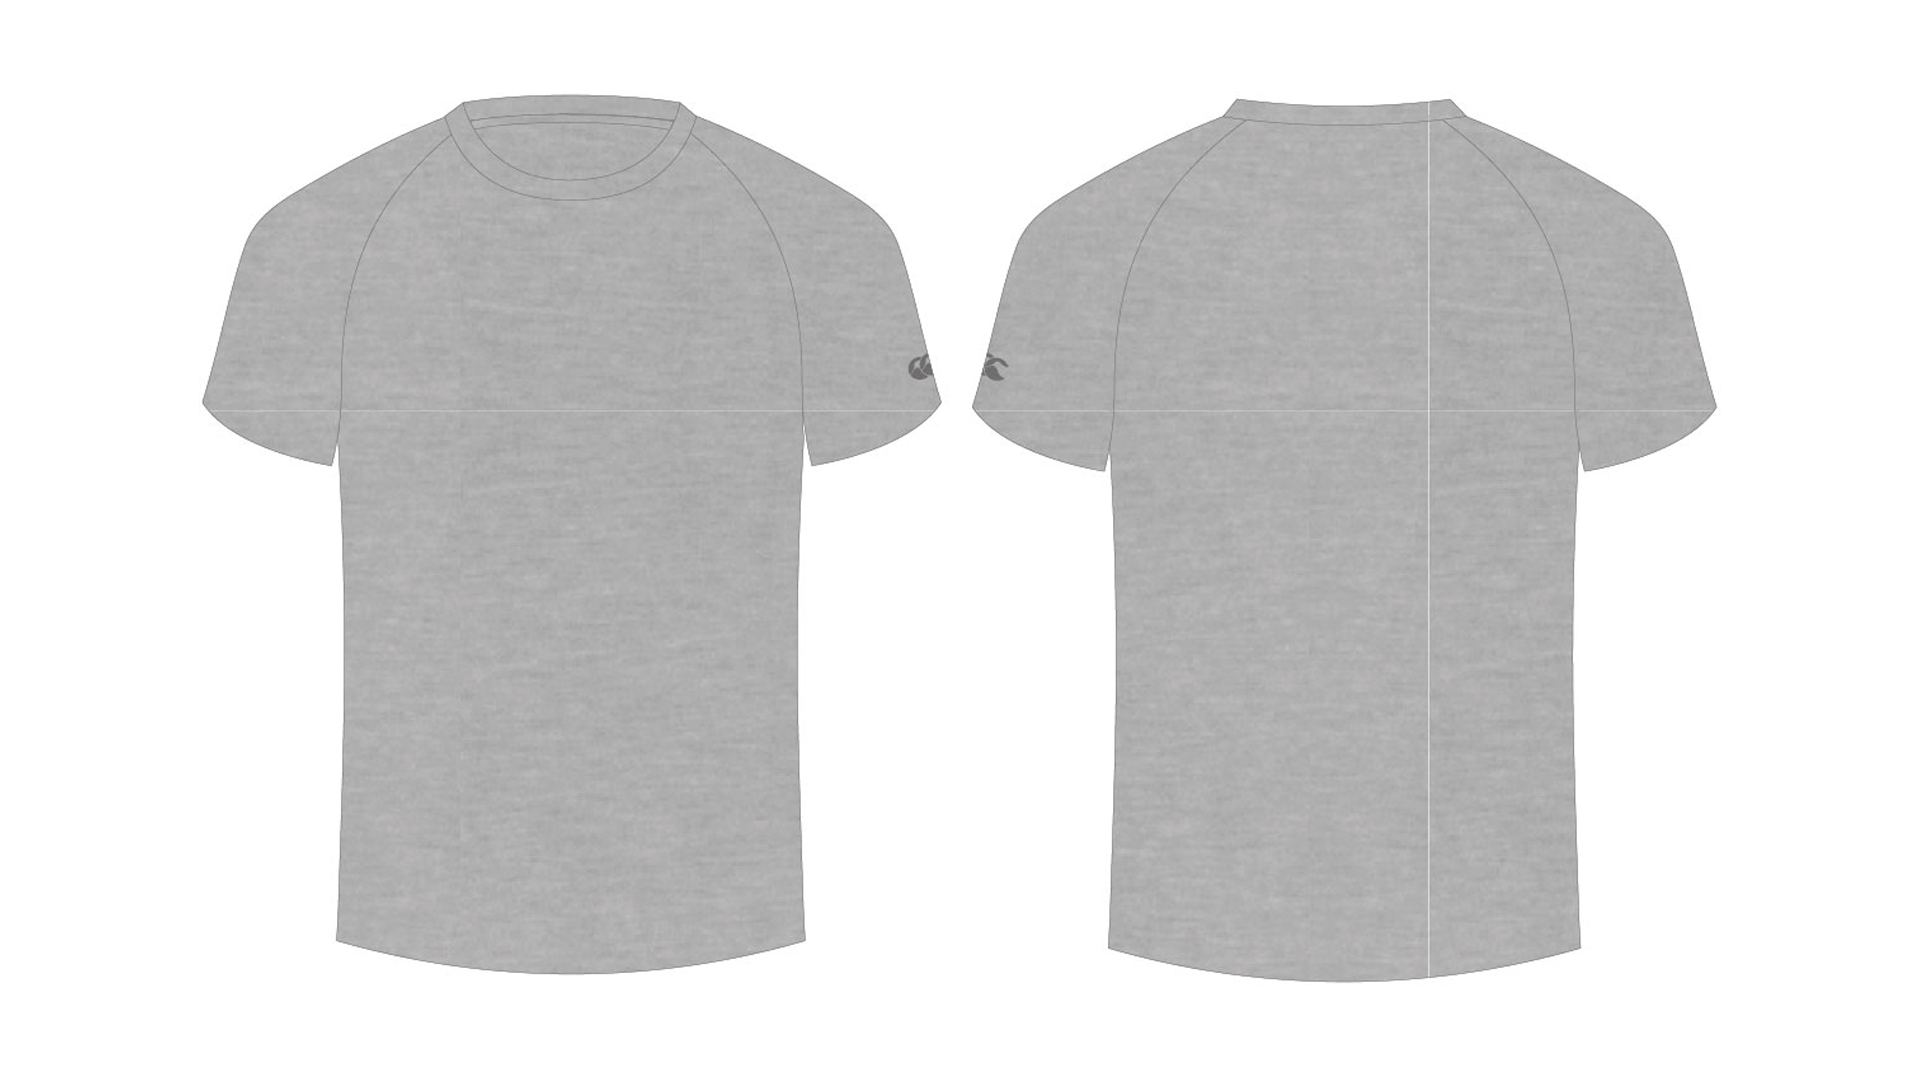 Blank Tshirt Template for Classroom in Gray Color - HD Wallpapers ...